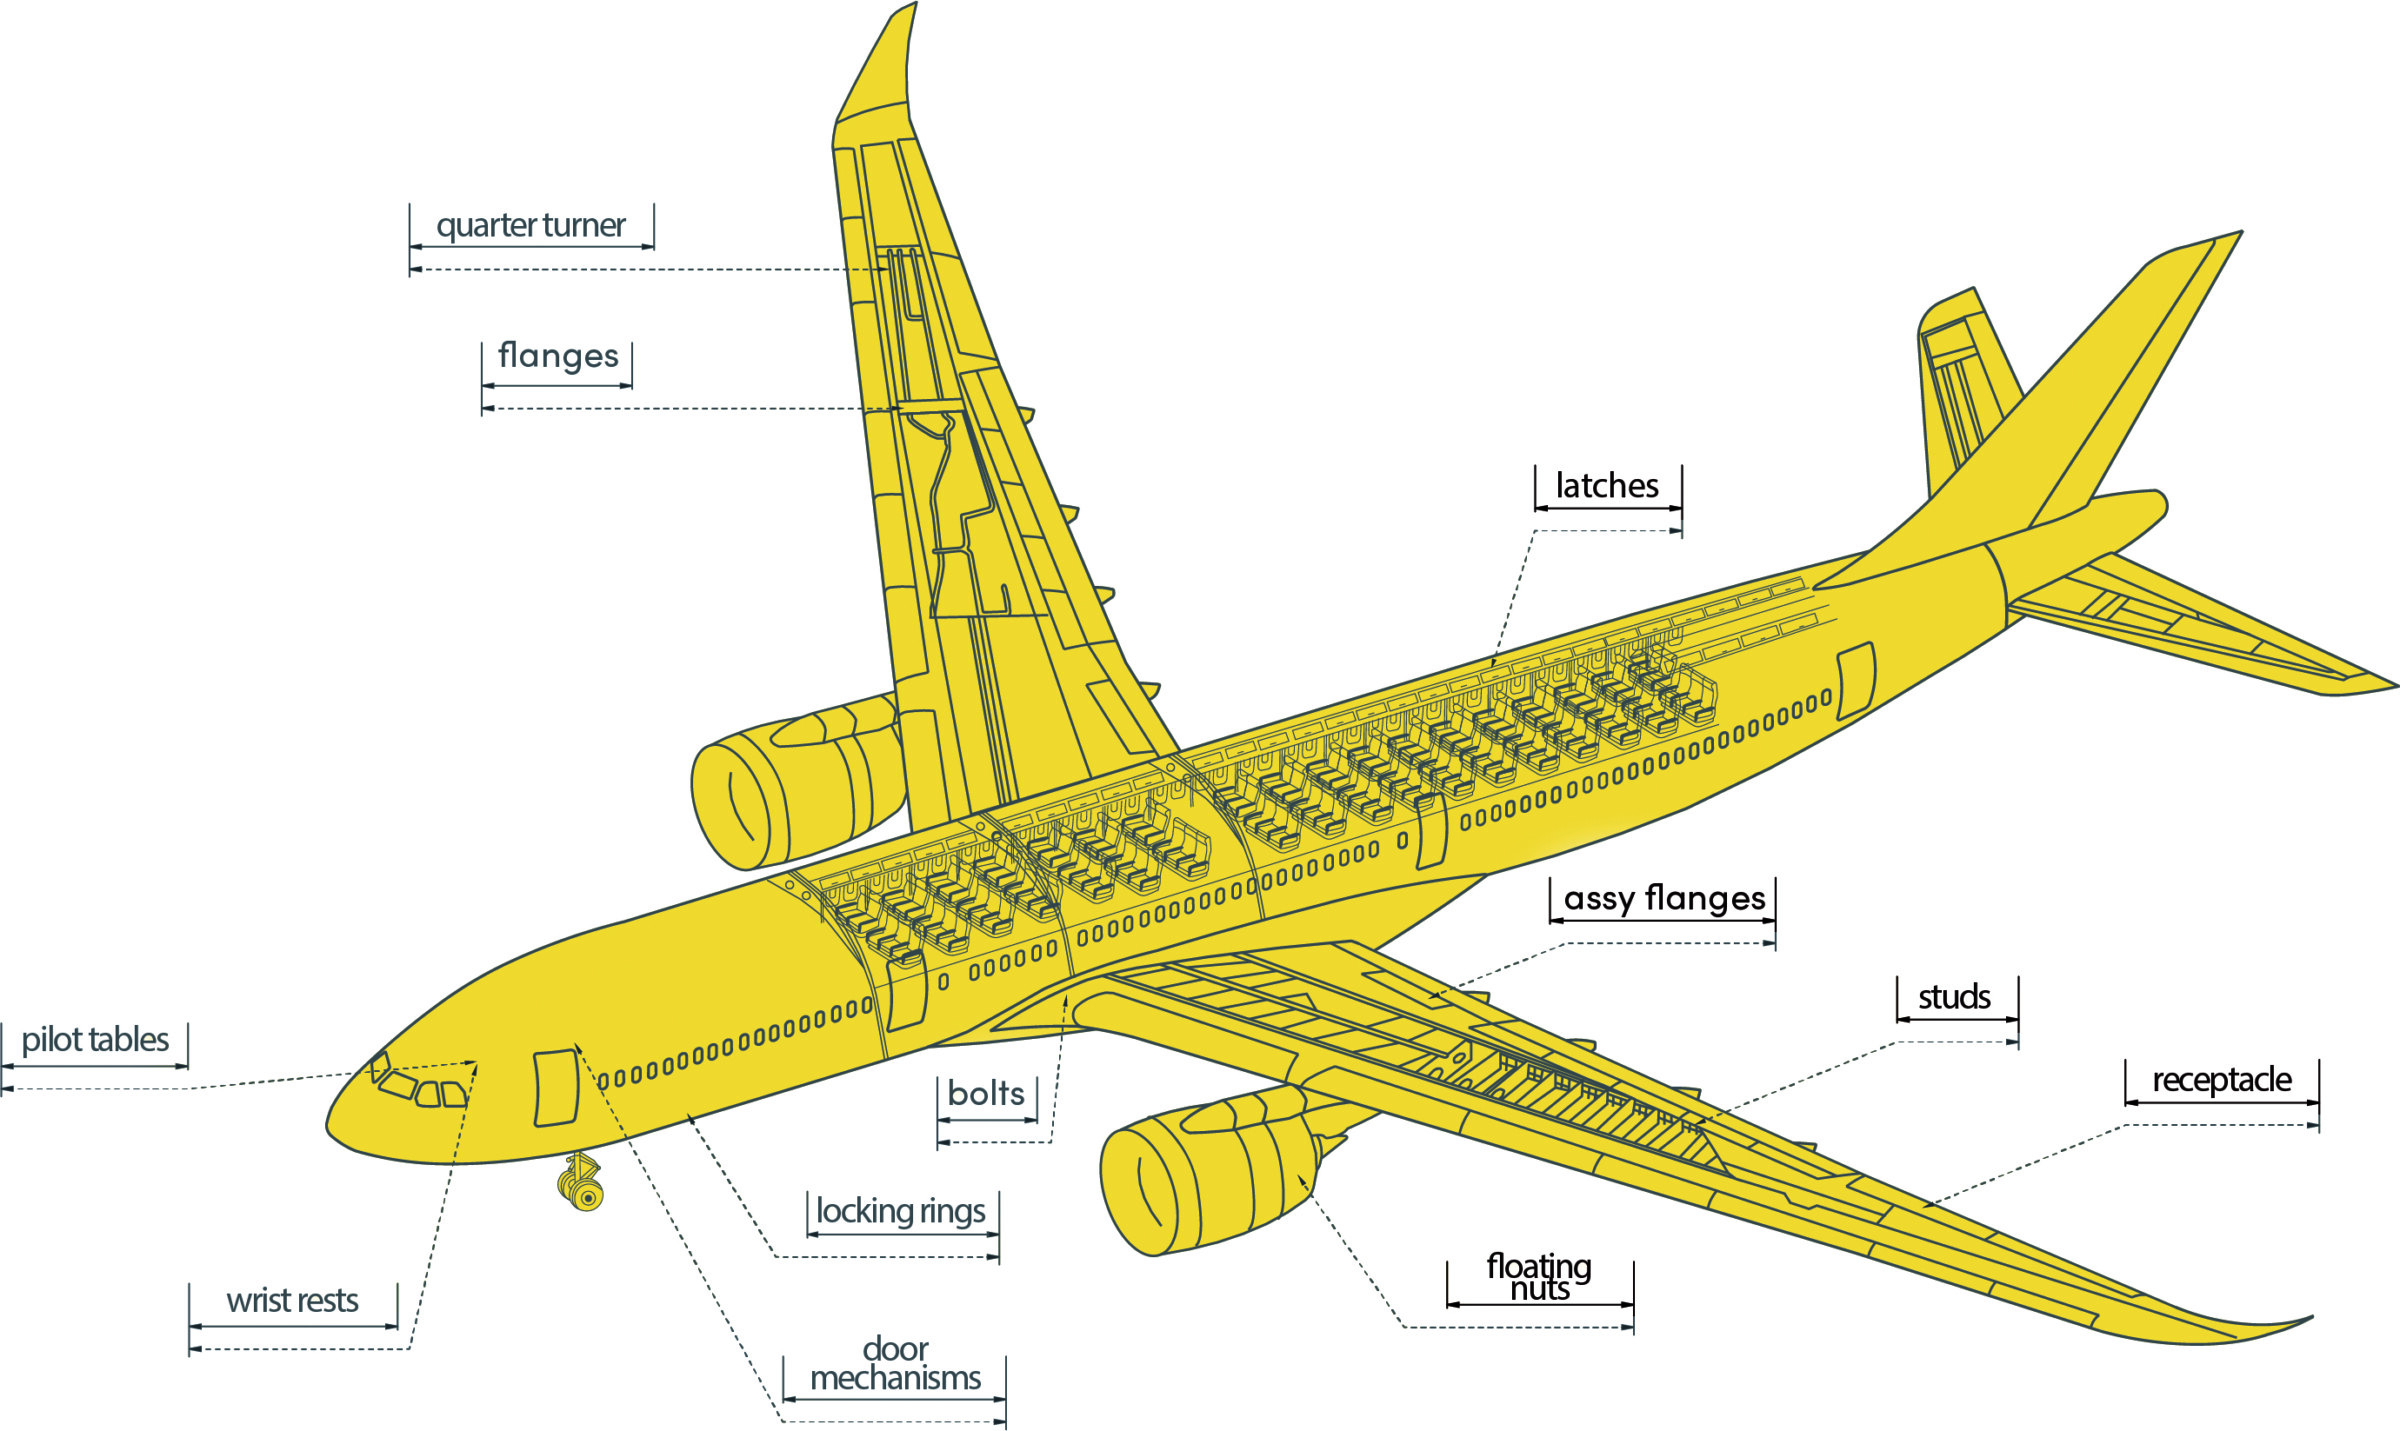 For everything from spacers to door closers, SACS is an expert supplier to the international aviation industry.